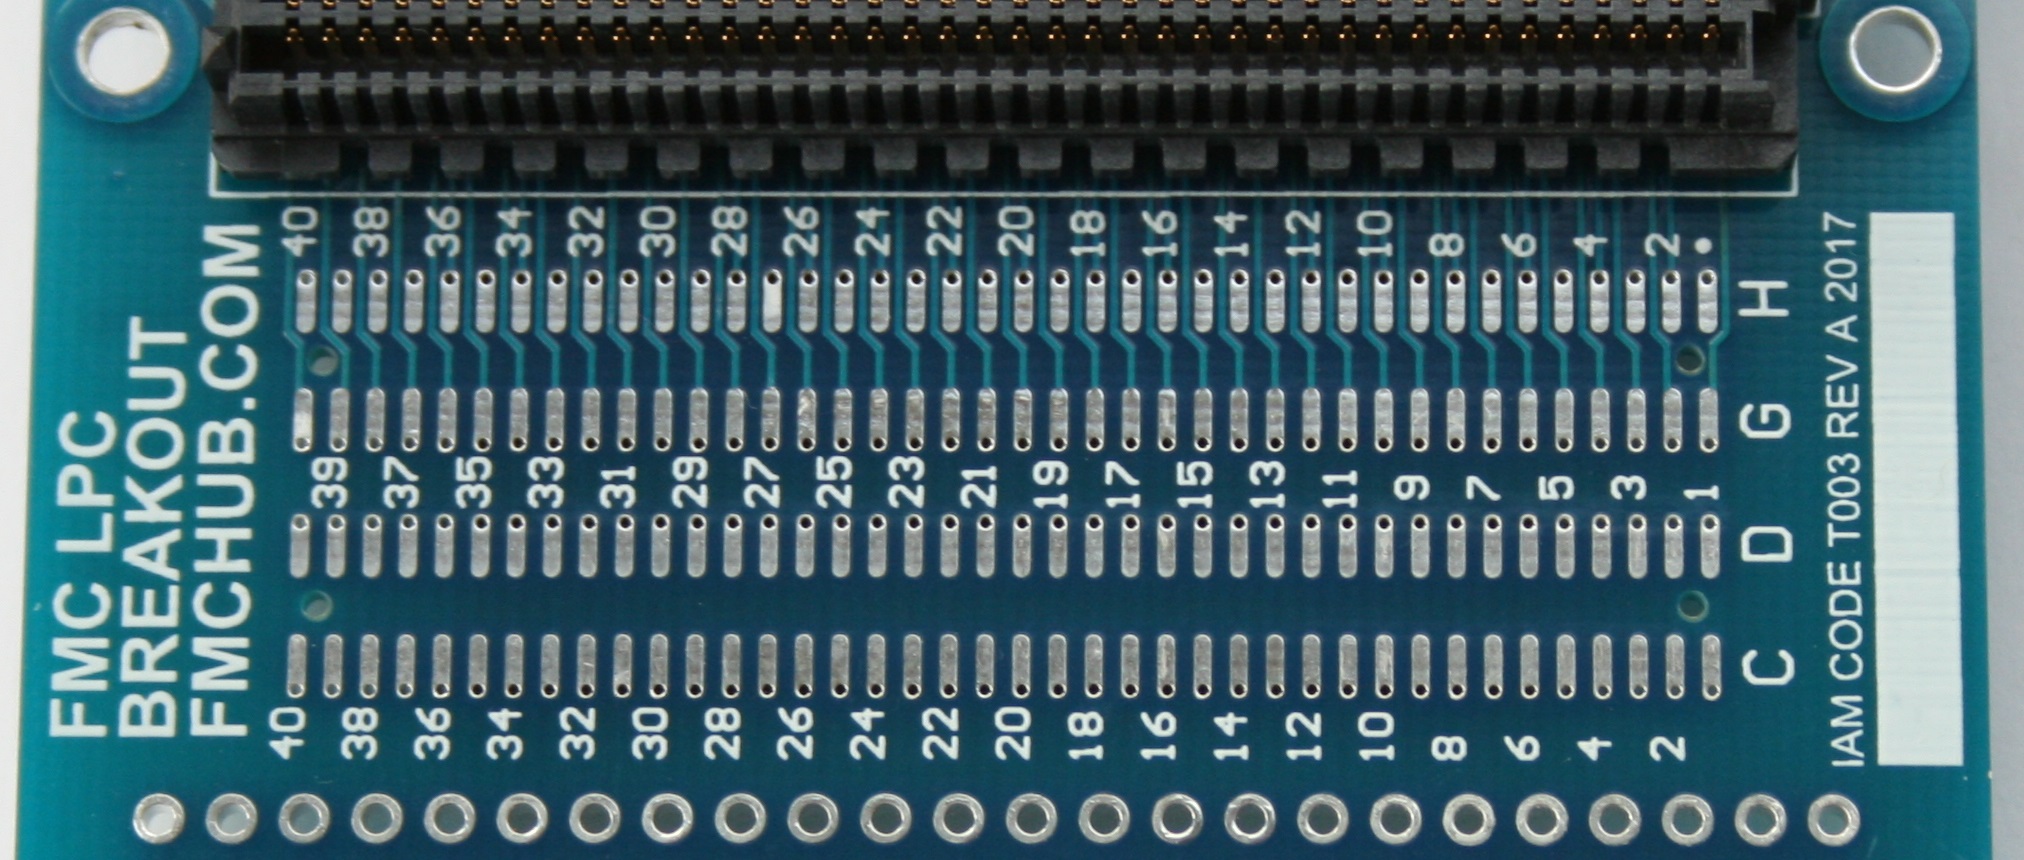 FMC LPC Breakout board with array of pads